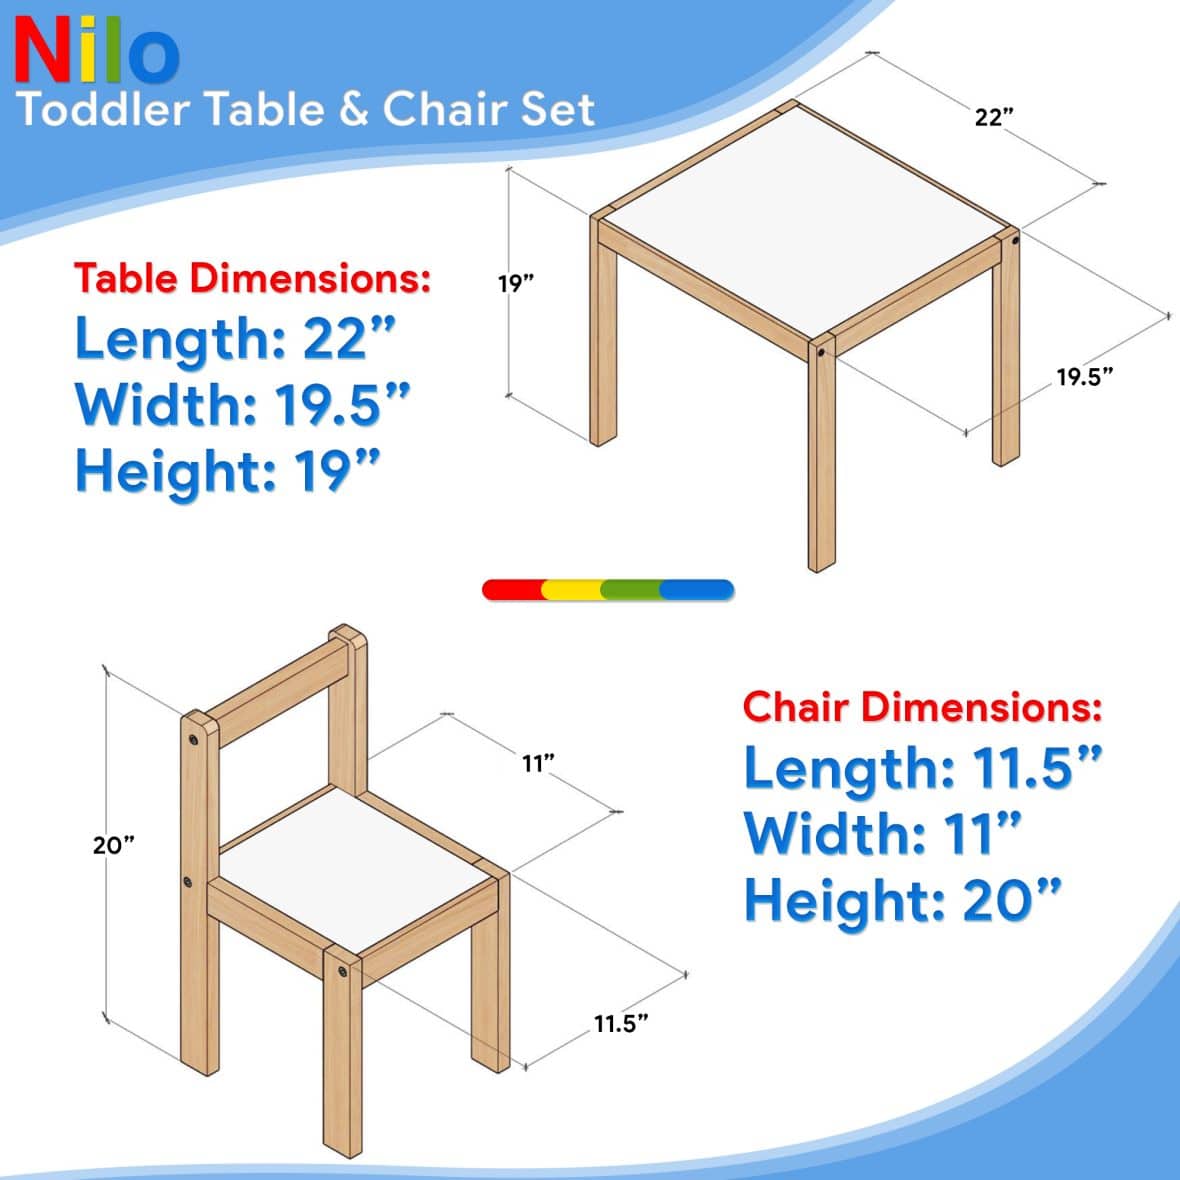 toddler table and chair set dimensions